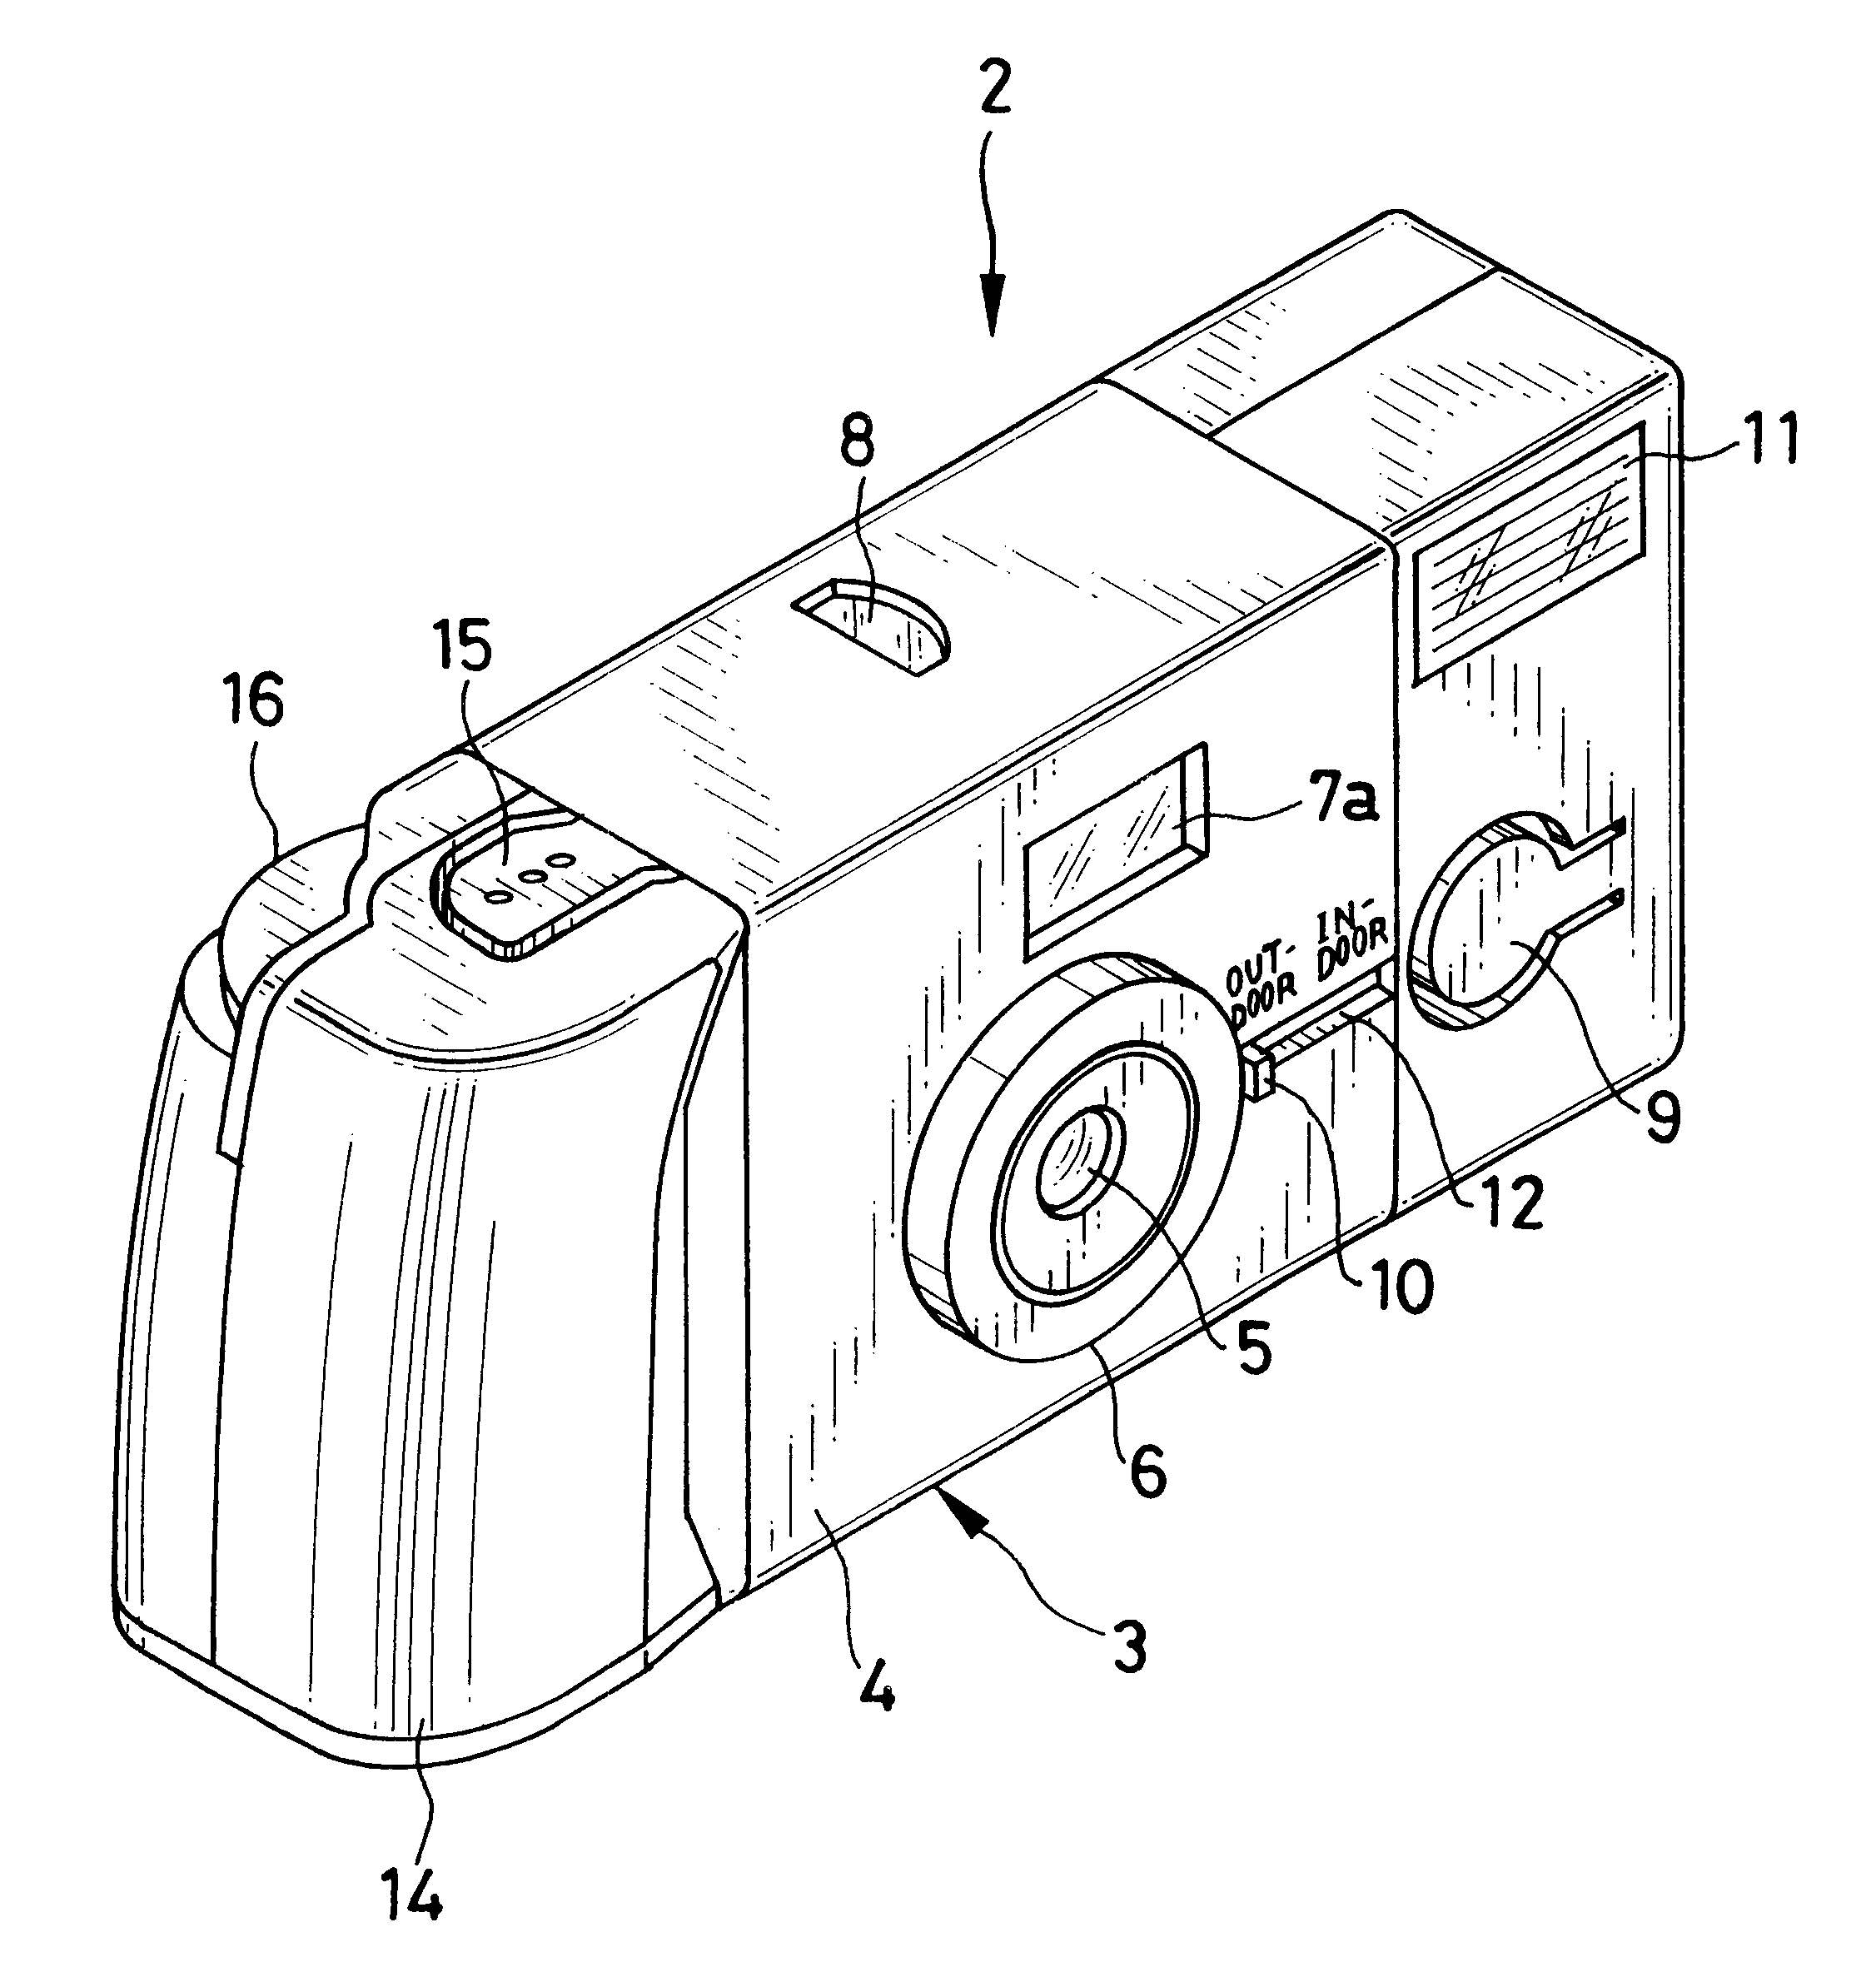 Lens-fitted photo film unit with flash device